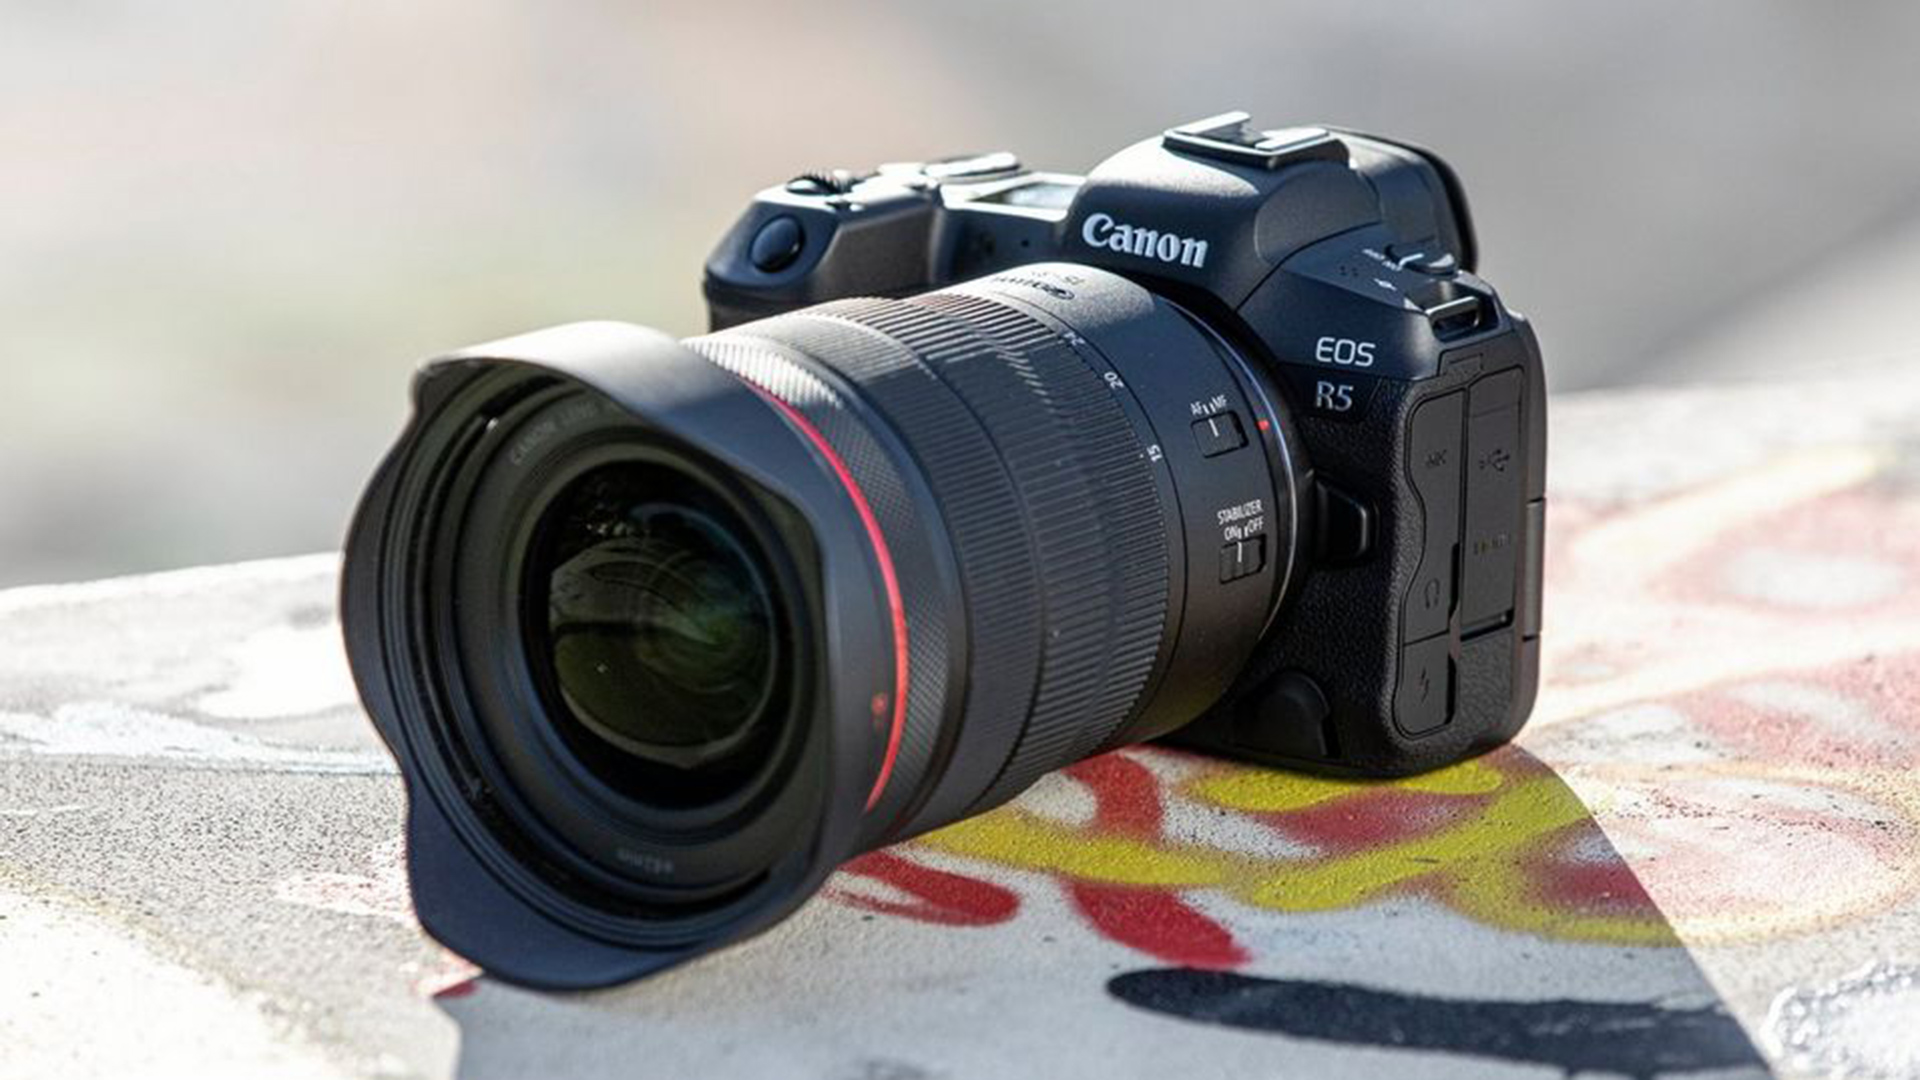 Canon EOS R5 overheating problems